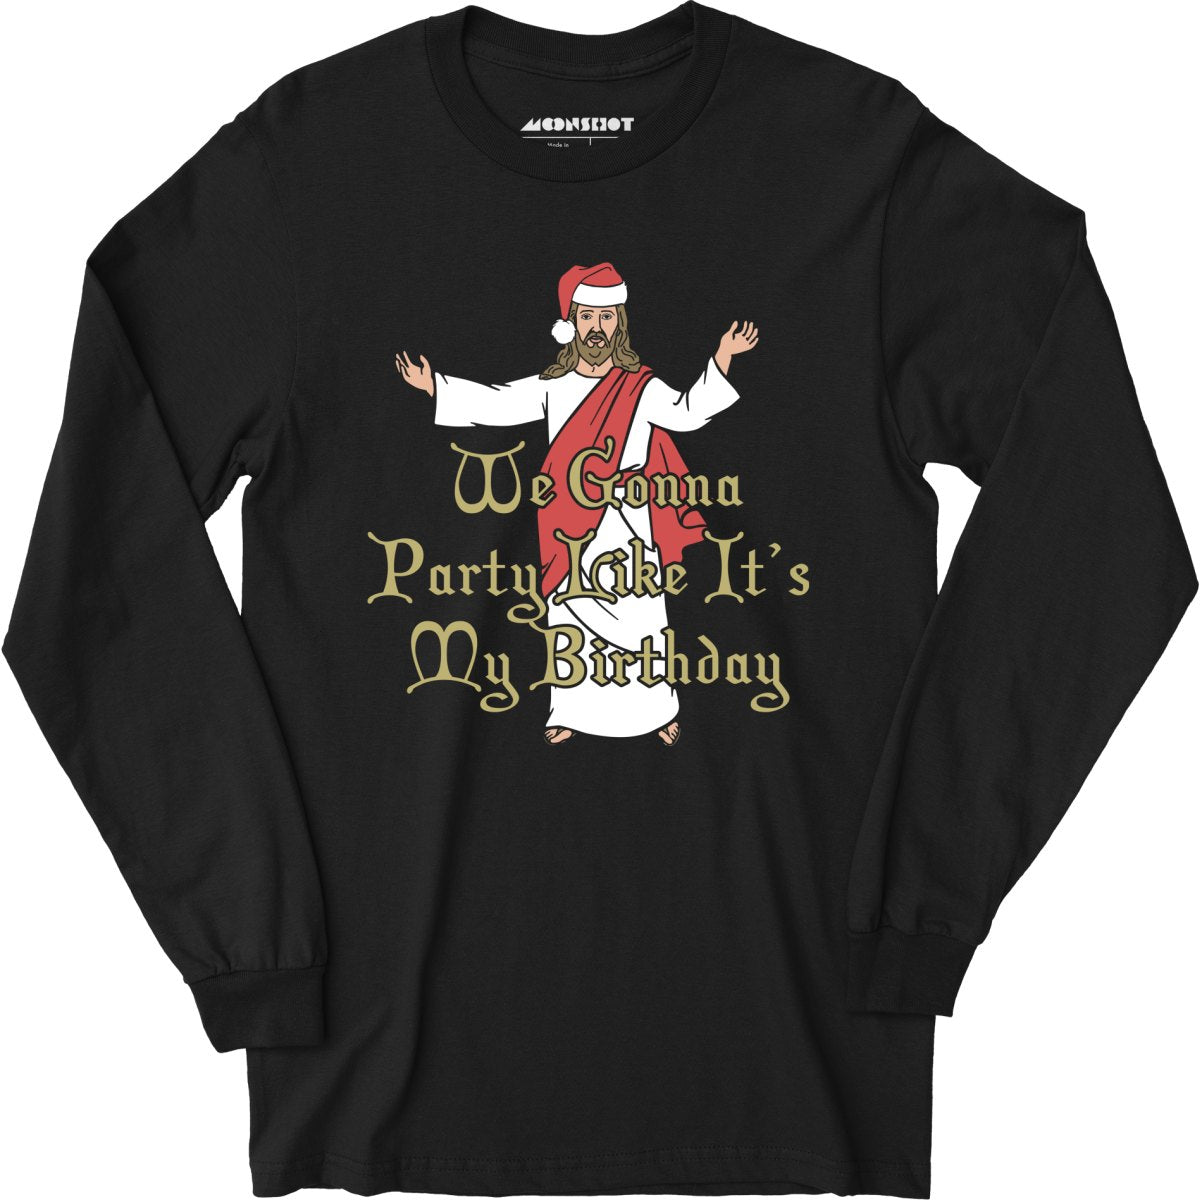 We Gonna Party Like It's My Birthday - Long Sleeve T-Shirt